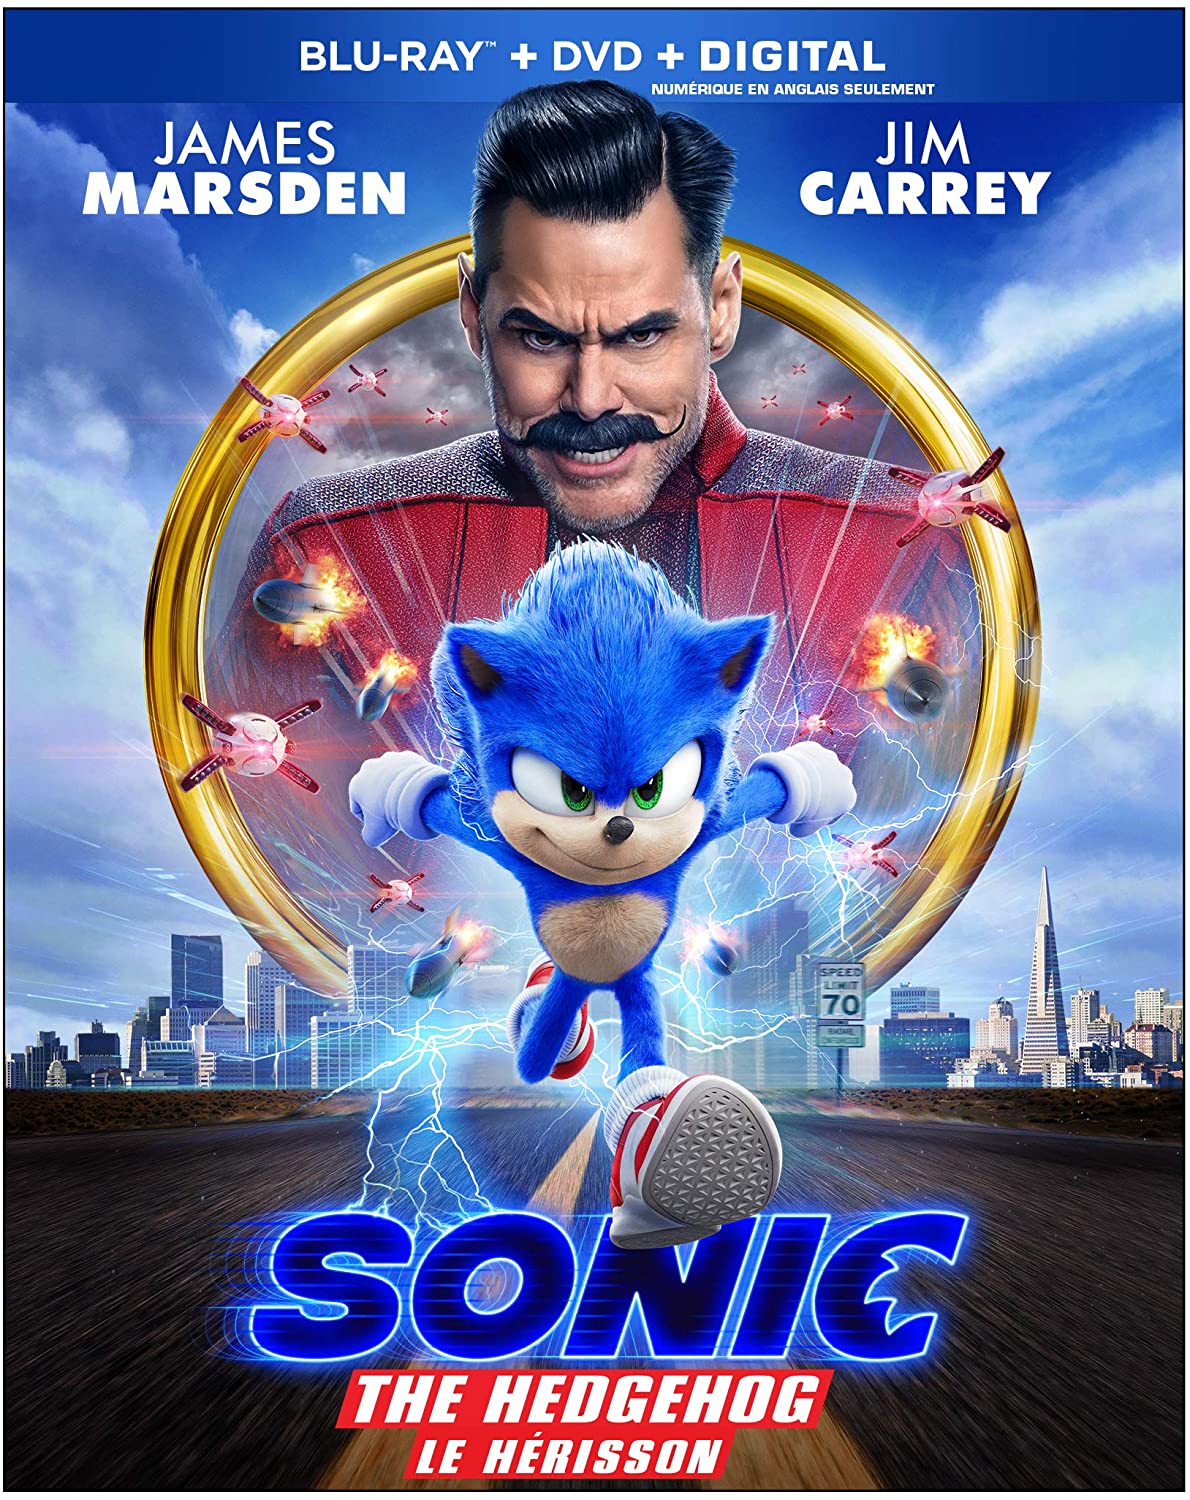 Sonic the Hedgehog on Blu-ray and DVD